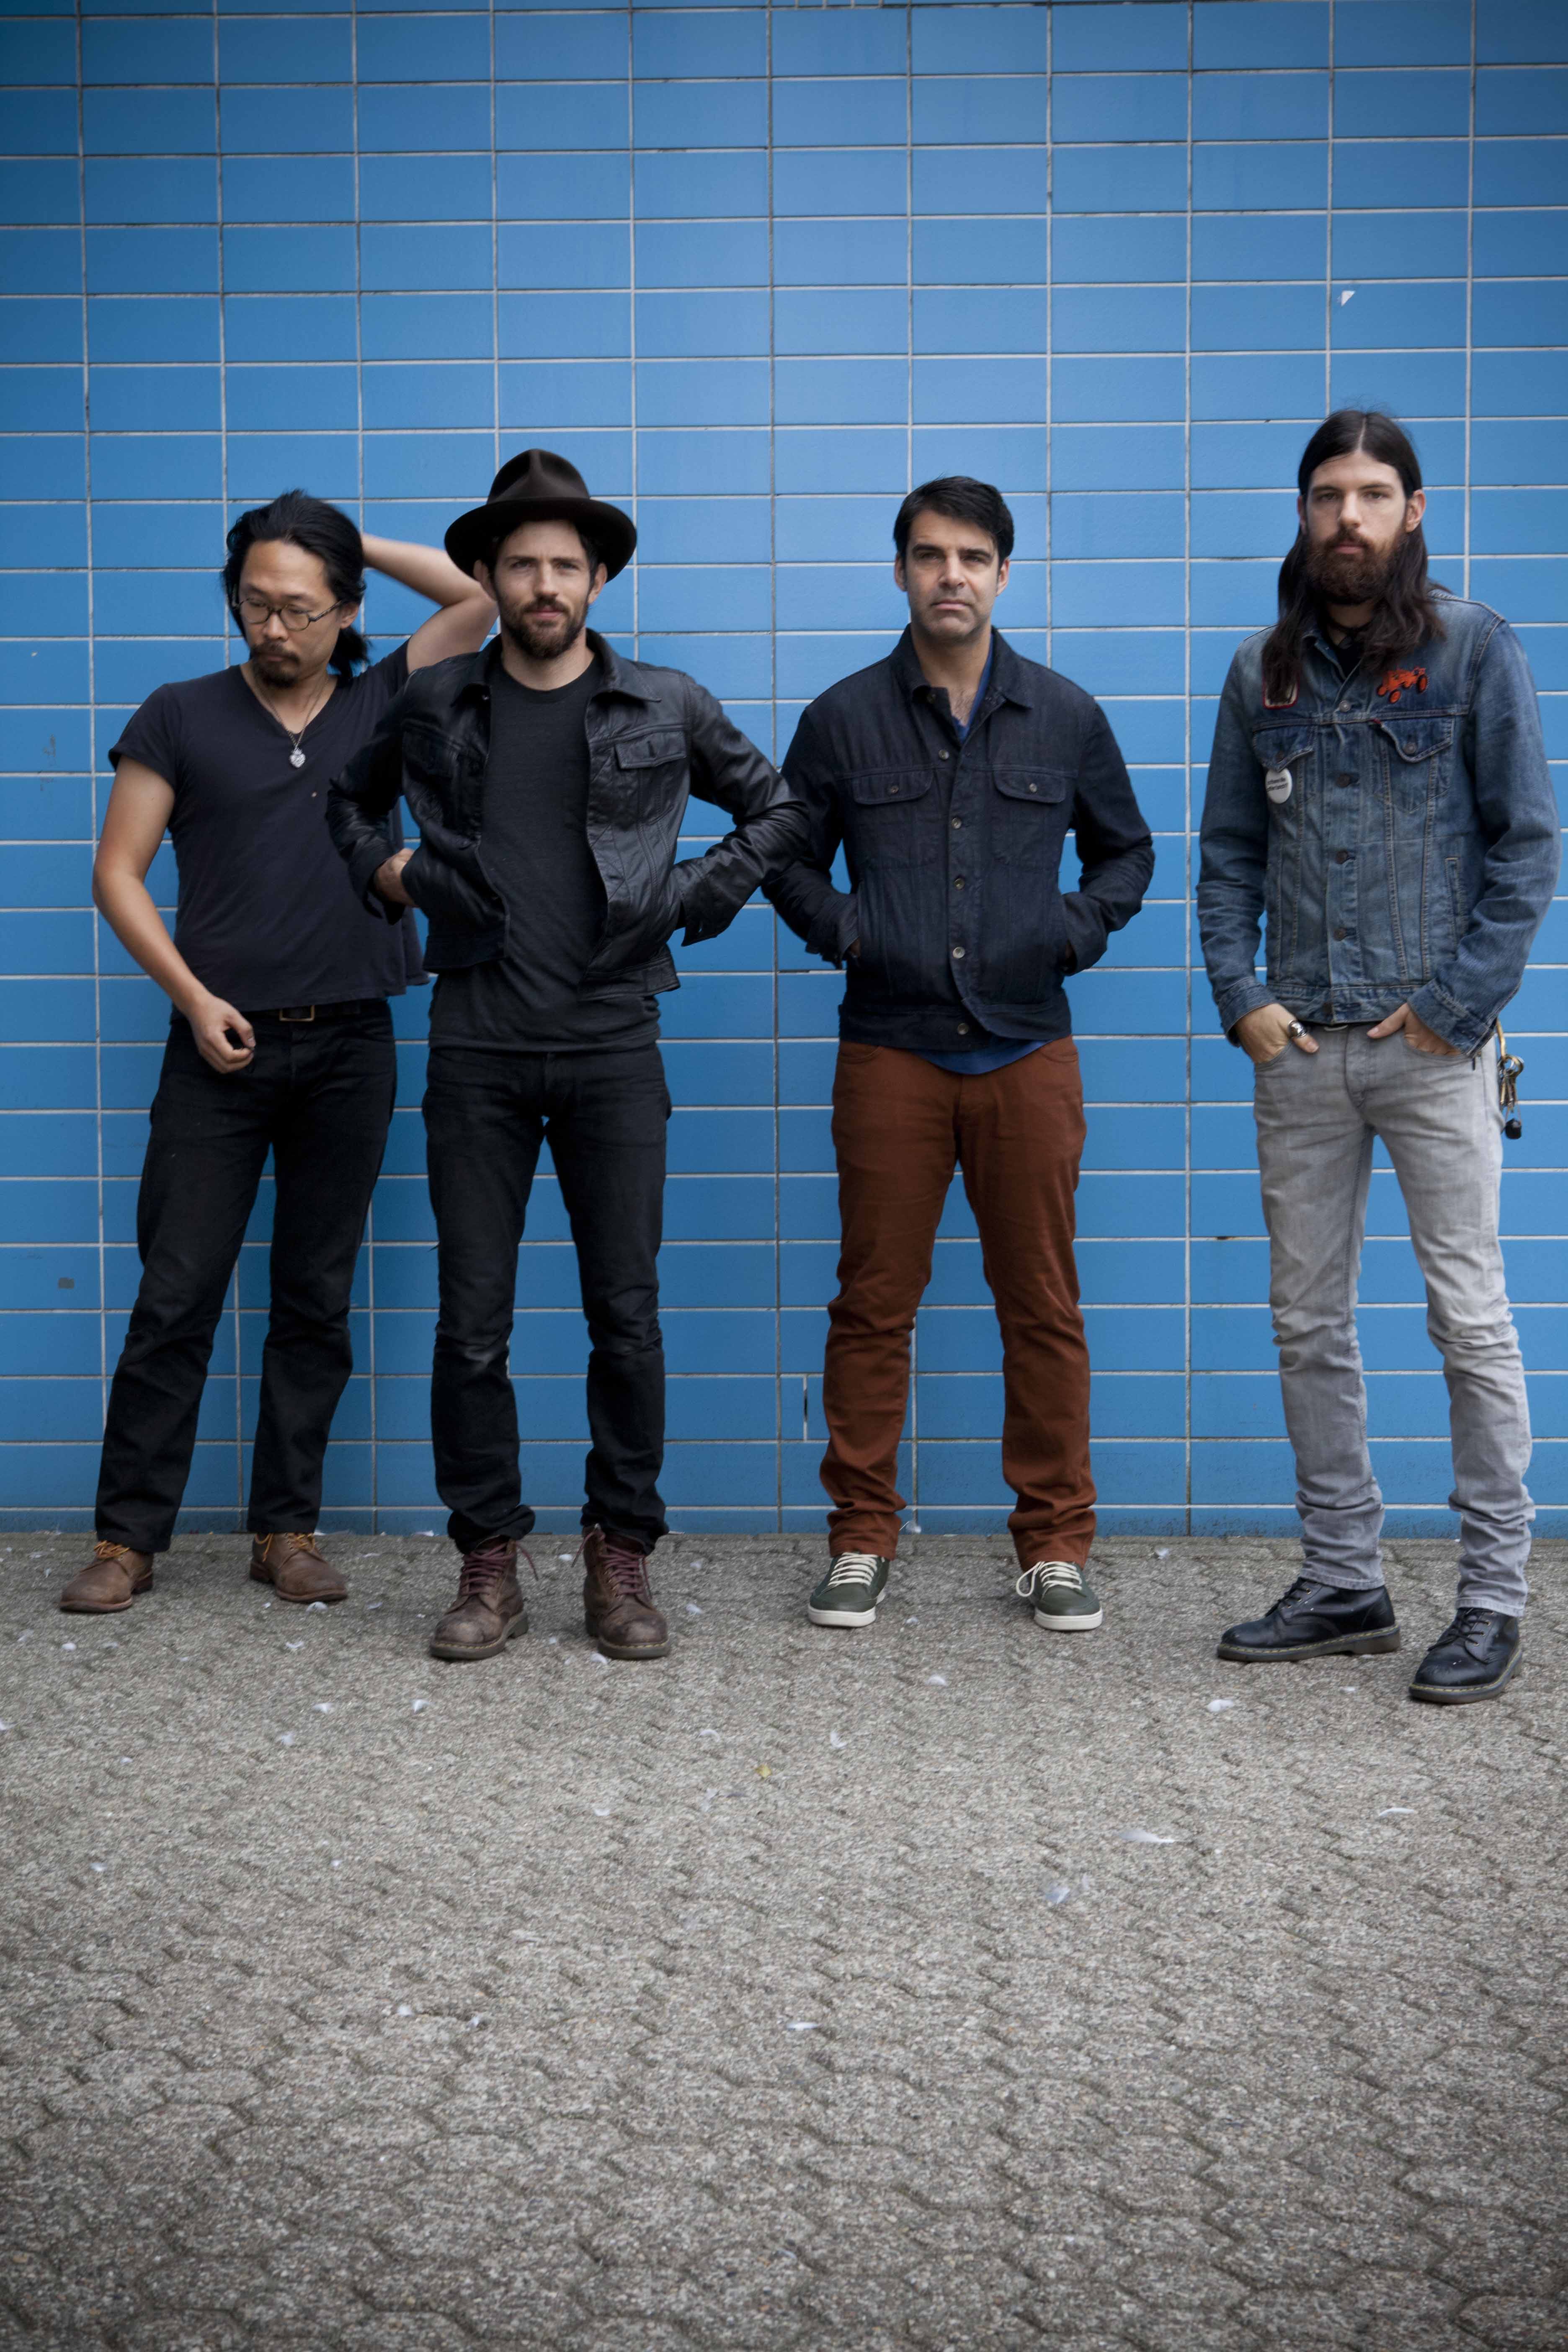 Live Video: The Avett Brothers, “The Clearness Is Gone”